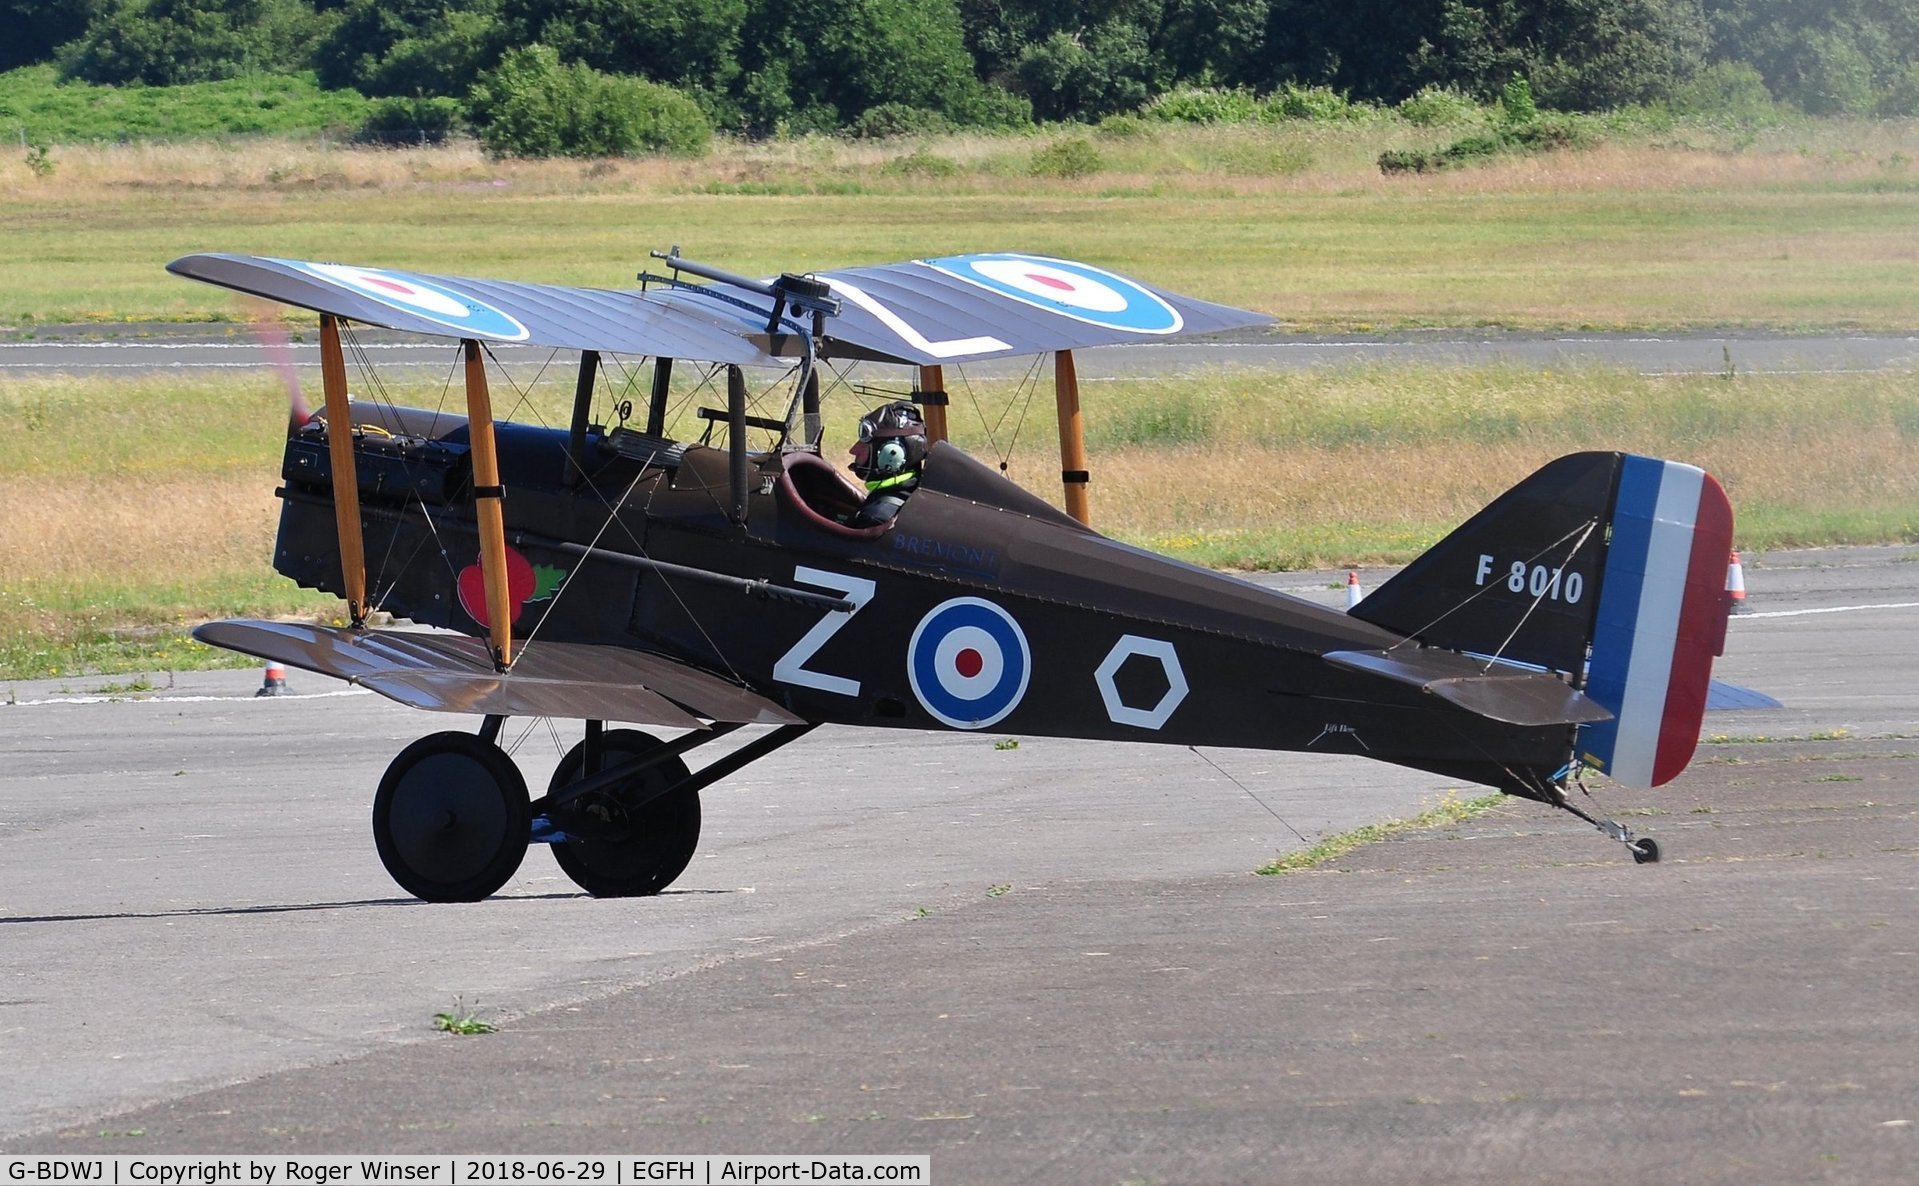 G-BDWJ, 1978 Royal Aircraft Factory SE-5A Replica C/N PFA 020-10034, Visiting SE-5A replica aircraft marked F8010/Z displayed by the Bremont Great War Team.